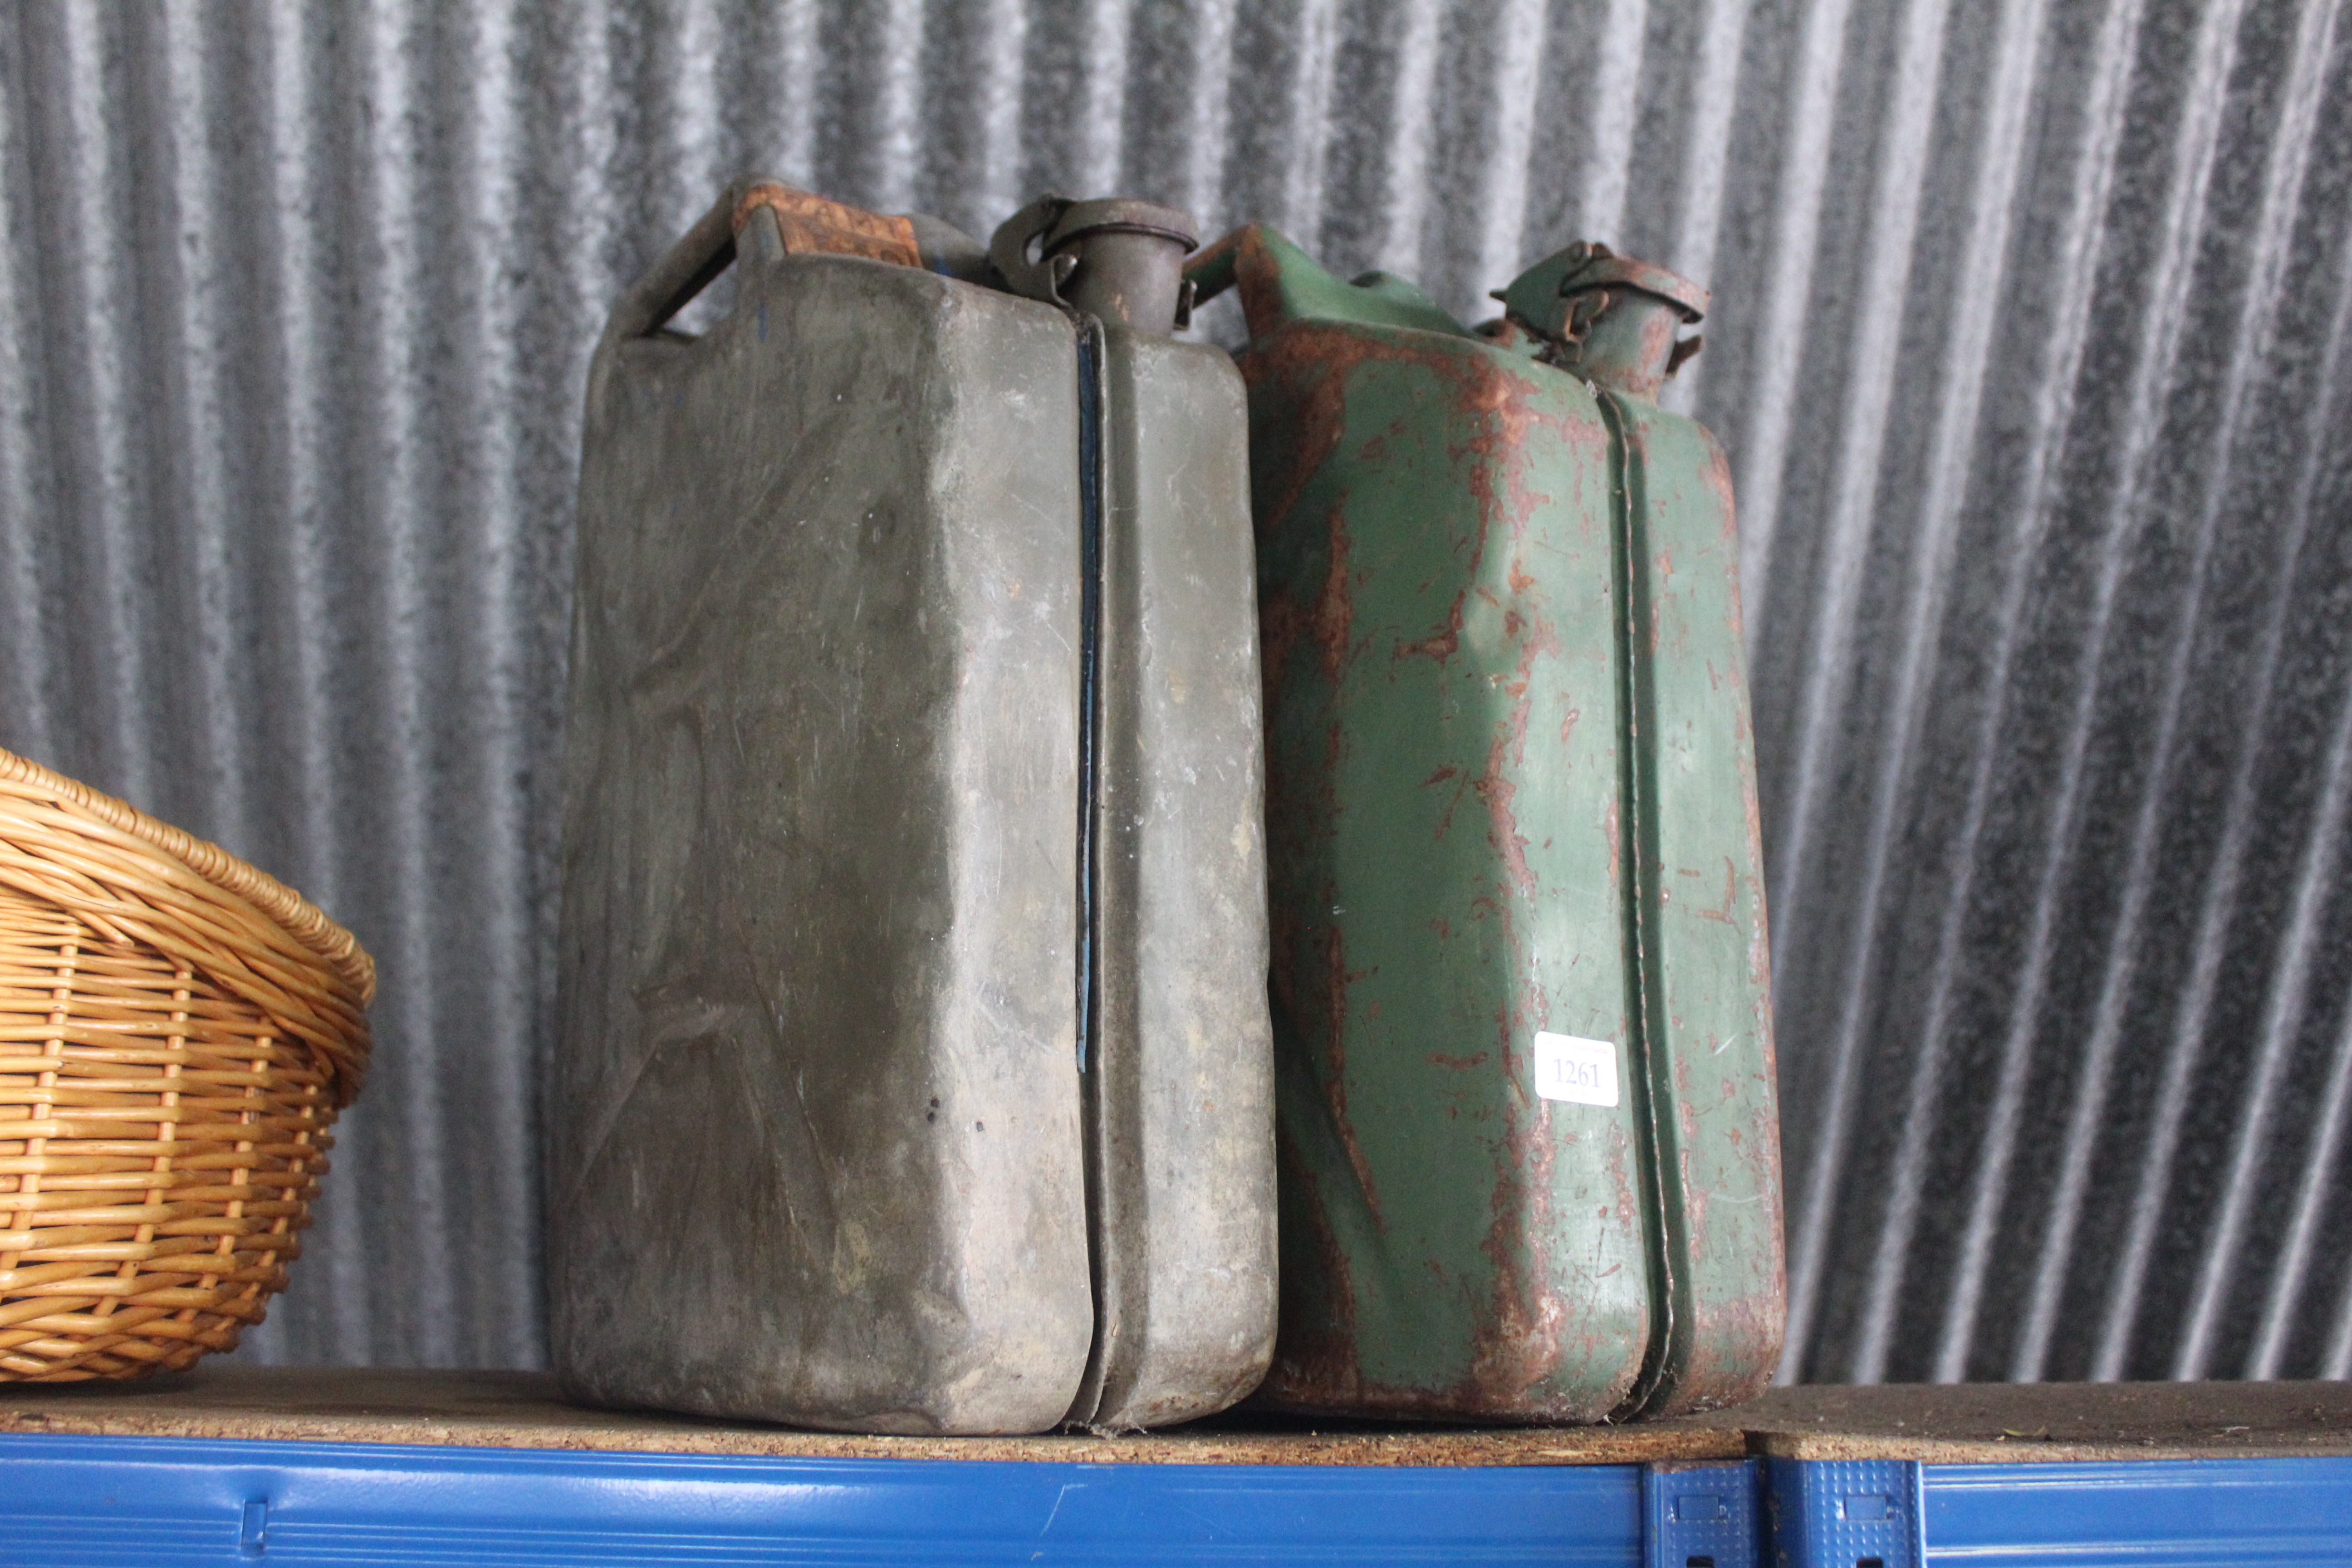 Two metal 20L Jerry cans